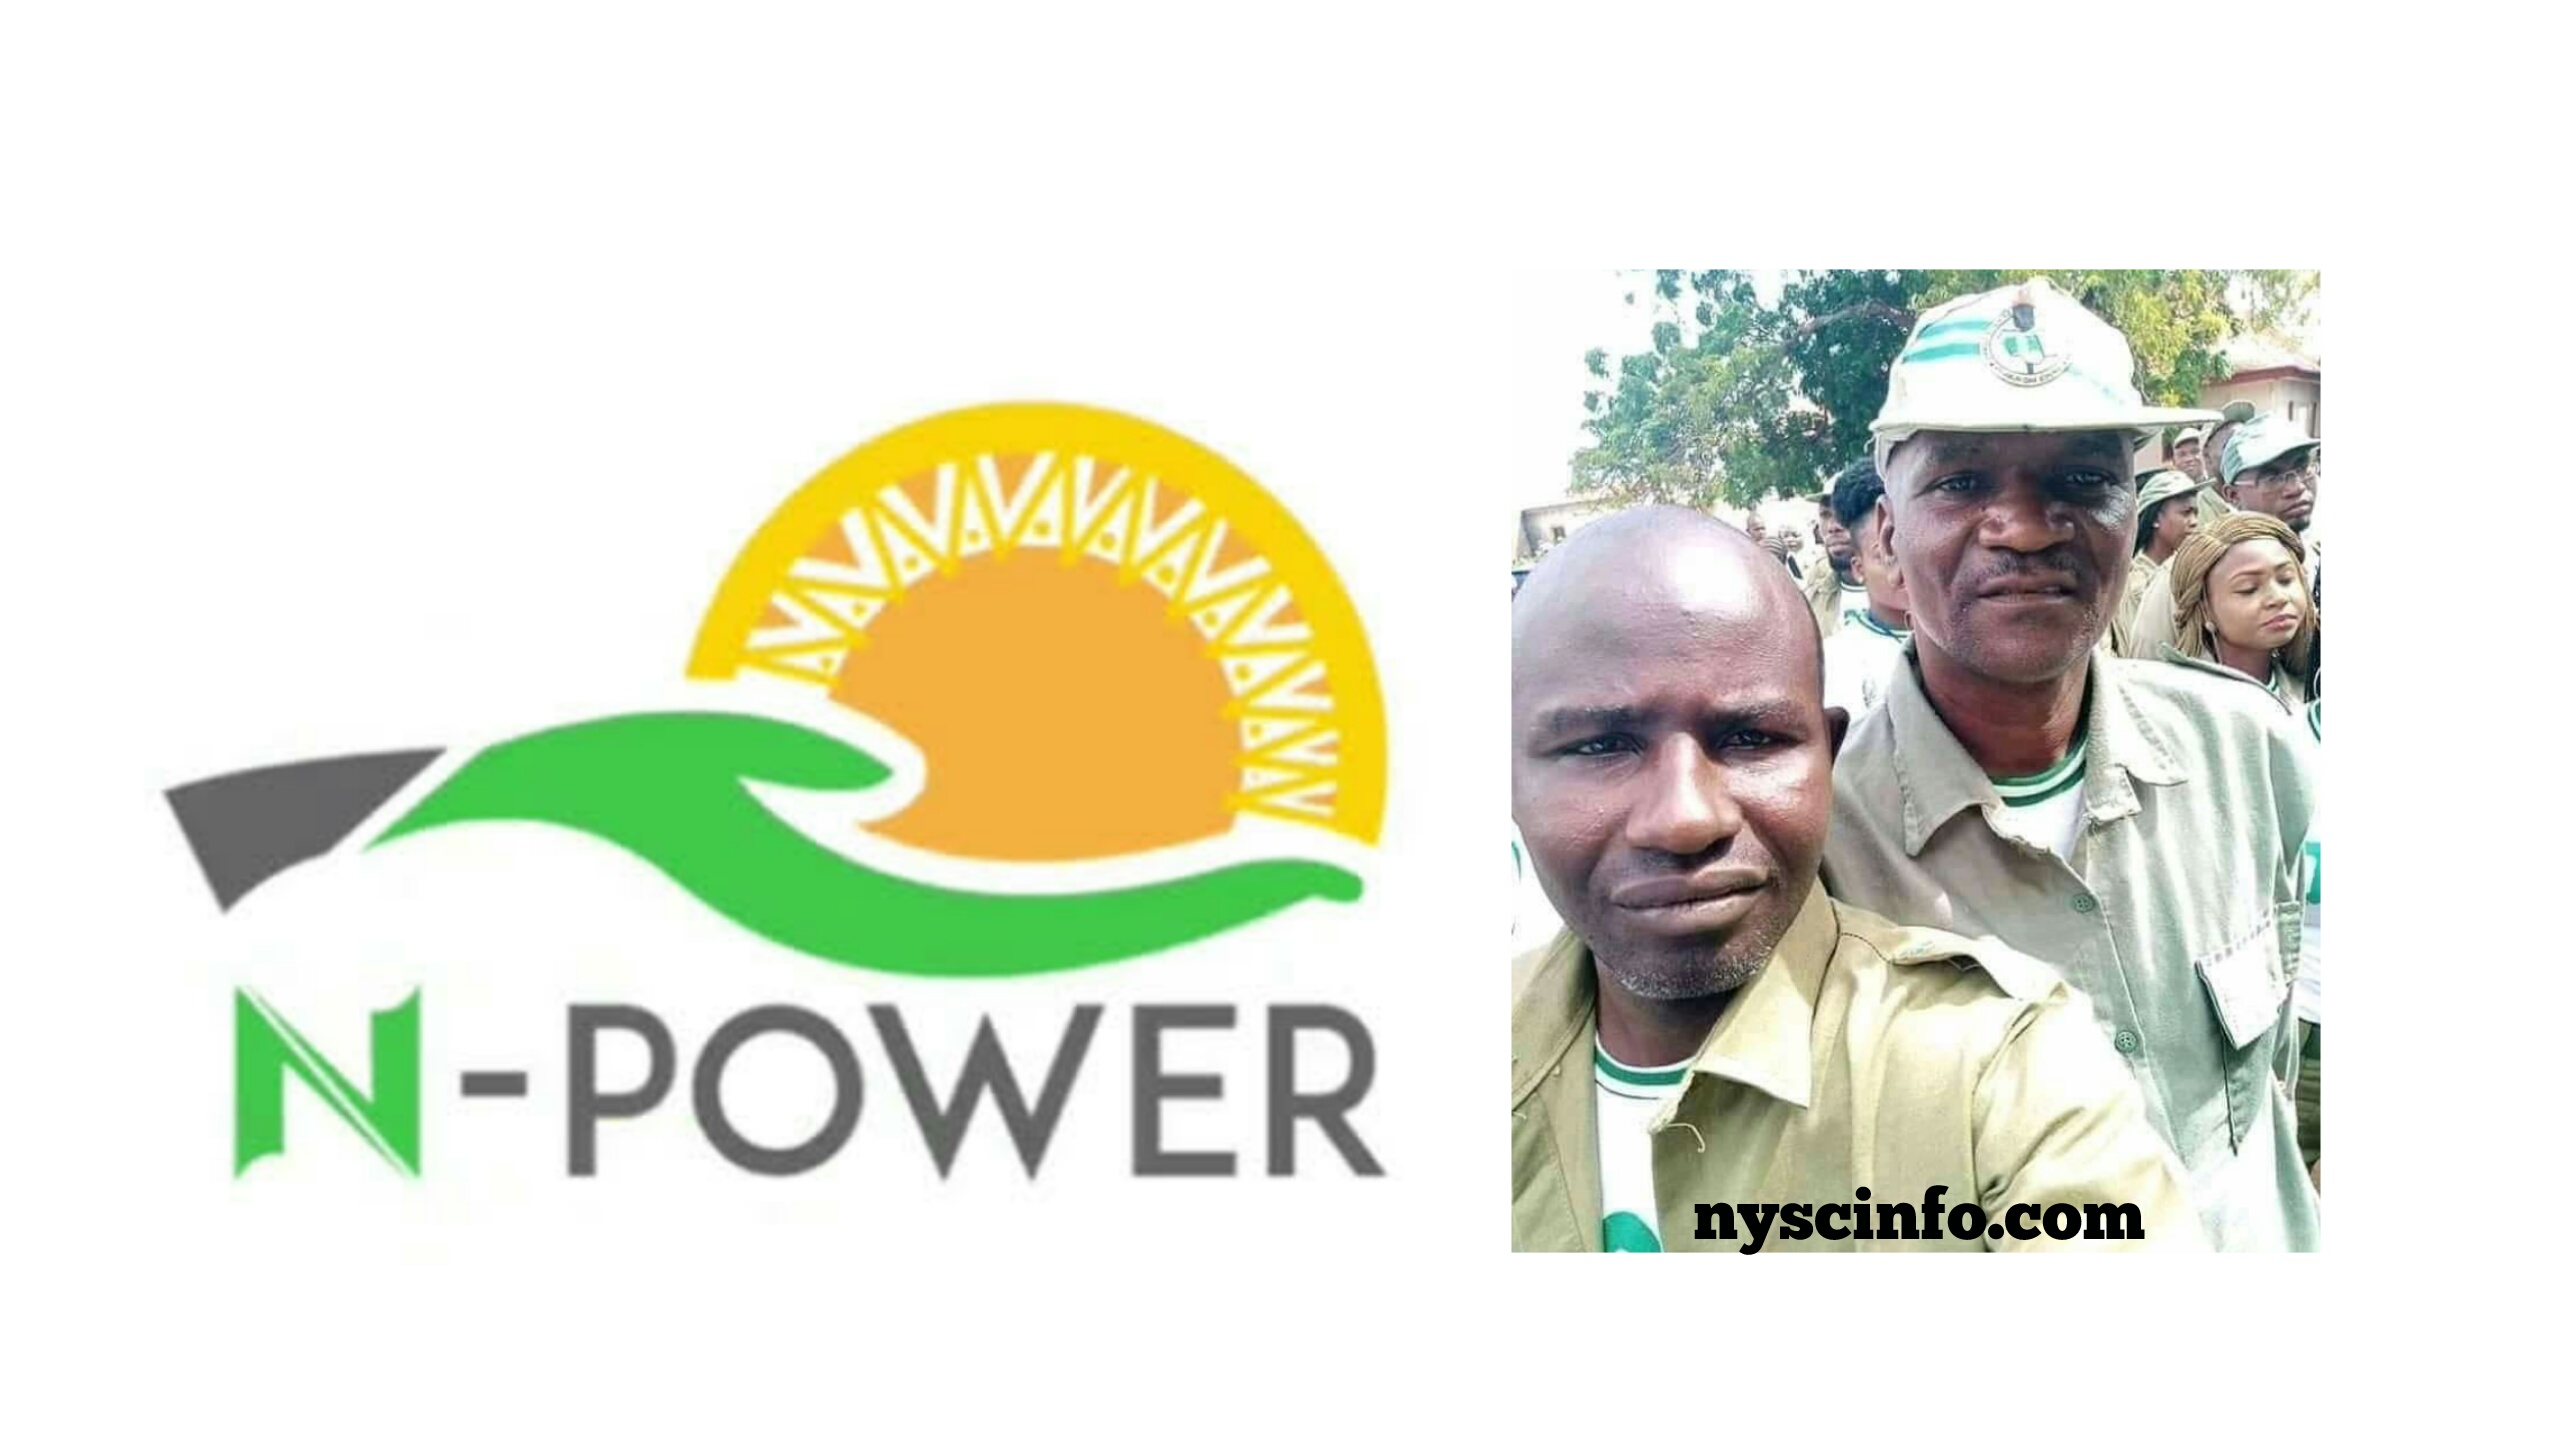 Apply for Npower